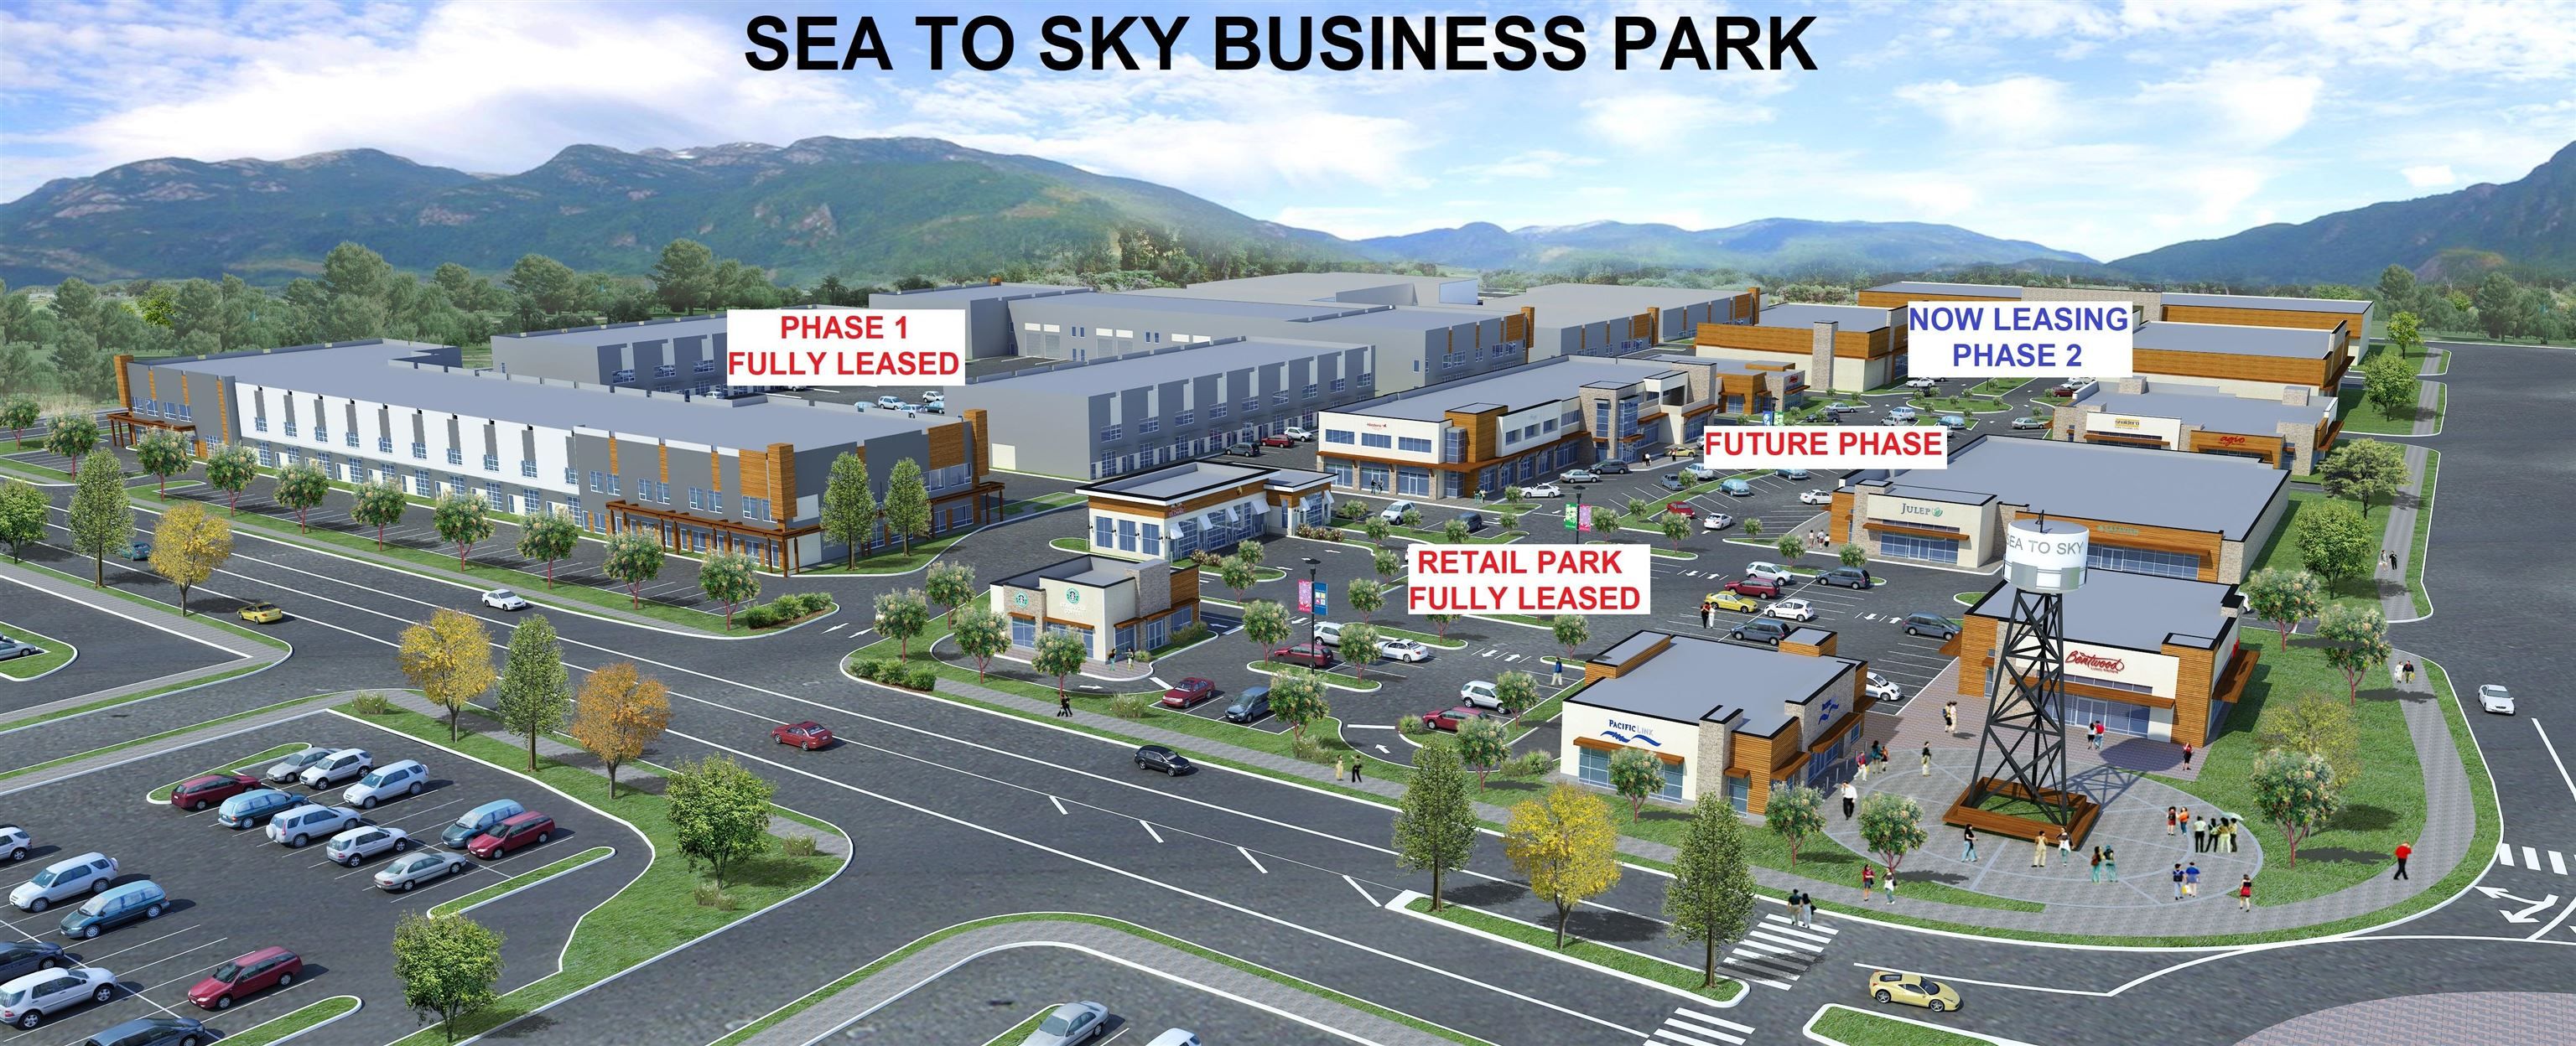 New property listed in Business Park, Squamish